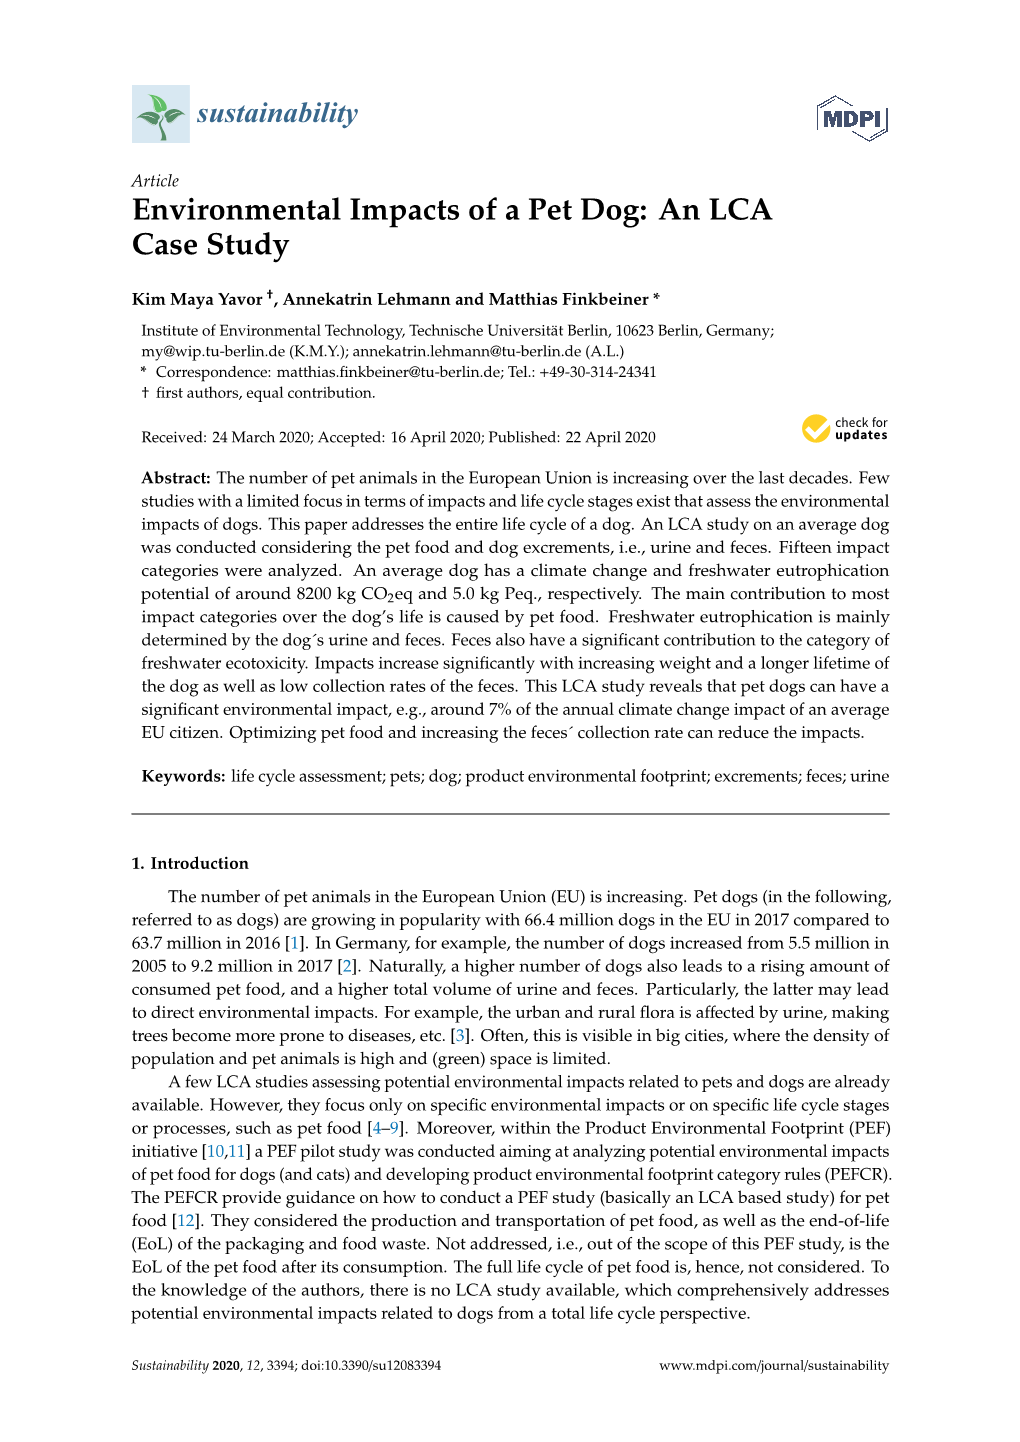 Environmental Impacts of a Pet Dog: an LCA Case Study